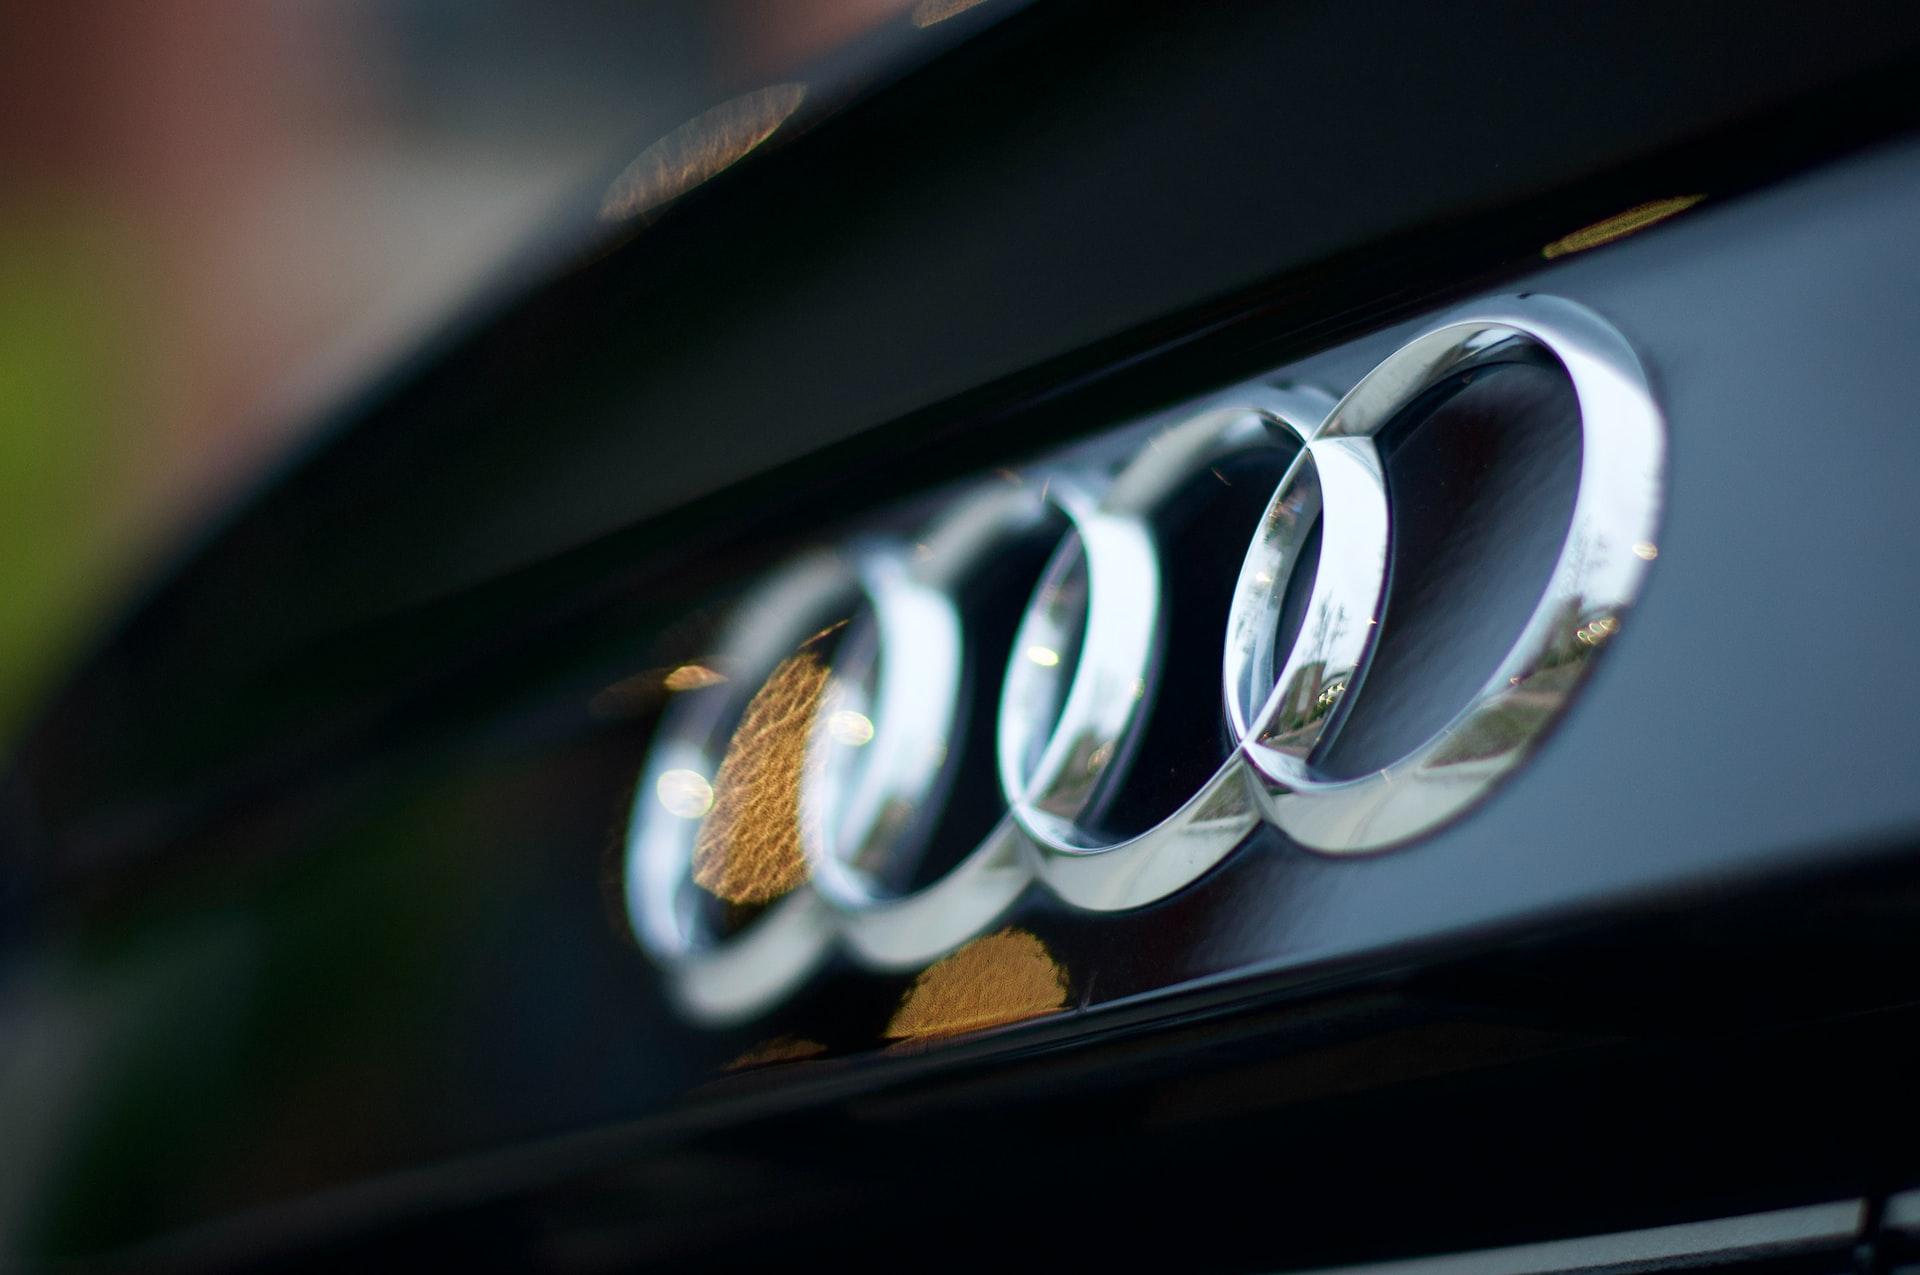 An close-up shot of the Audi logo on the front grille of a car.